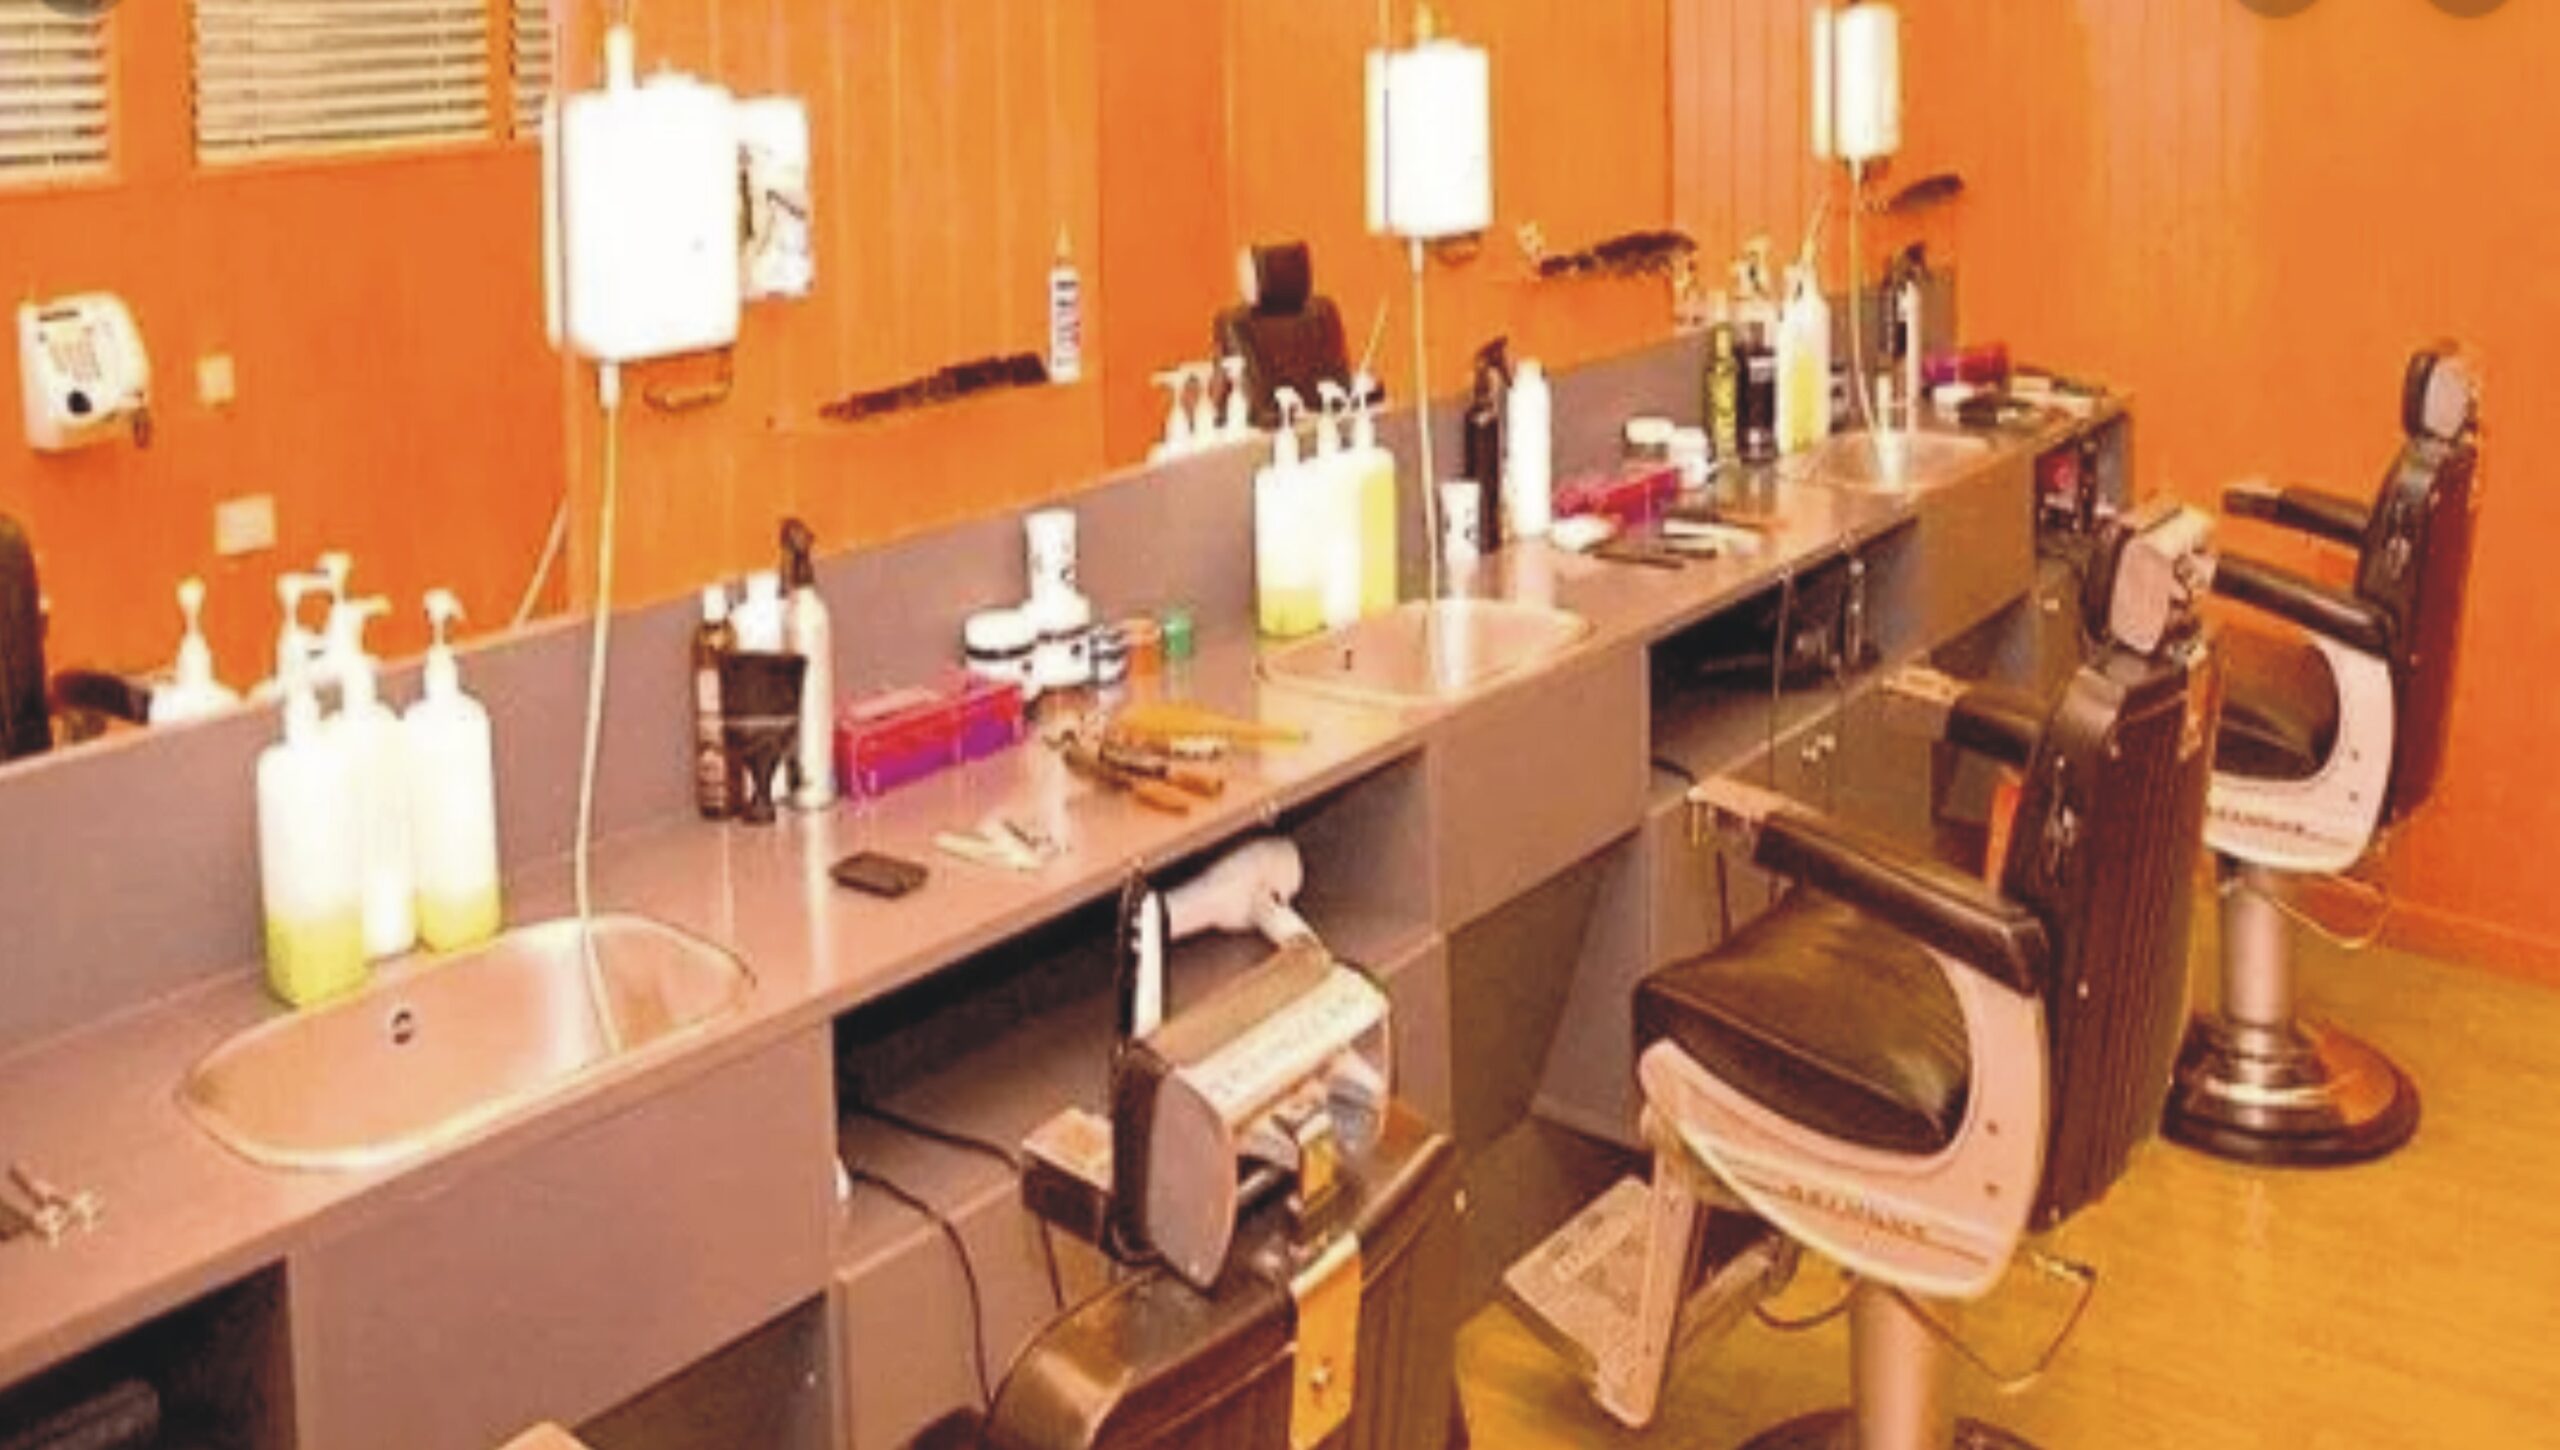 How To Start a Hair Salon Business In Nigeria